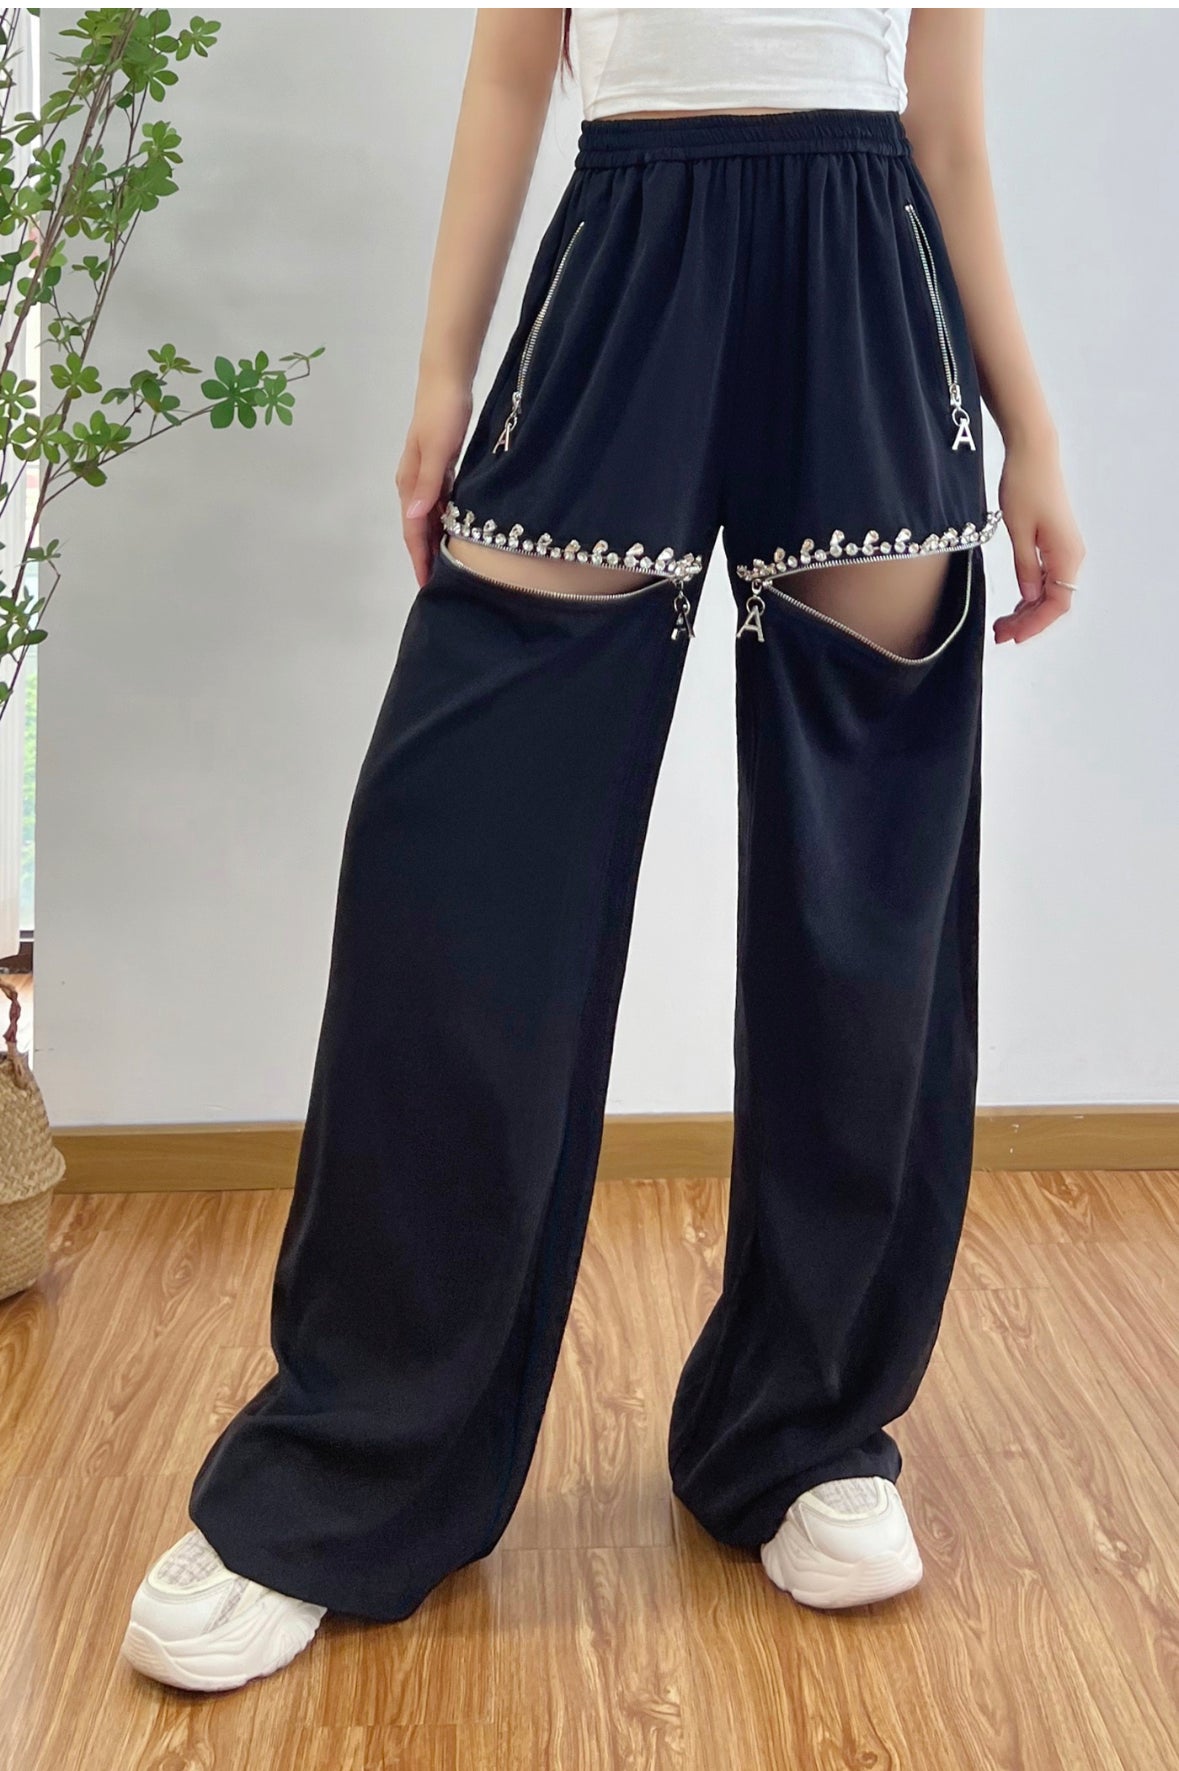 UnZip with crystals pants